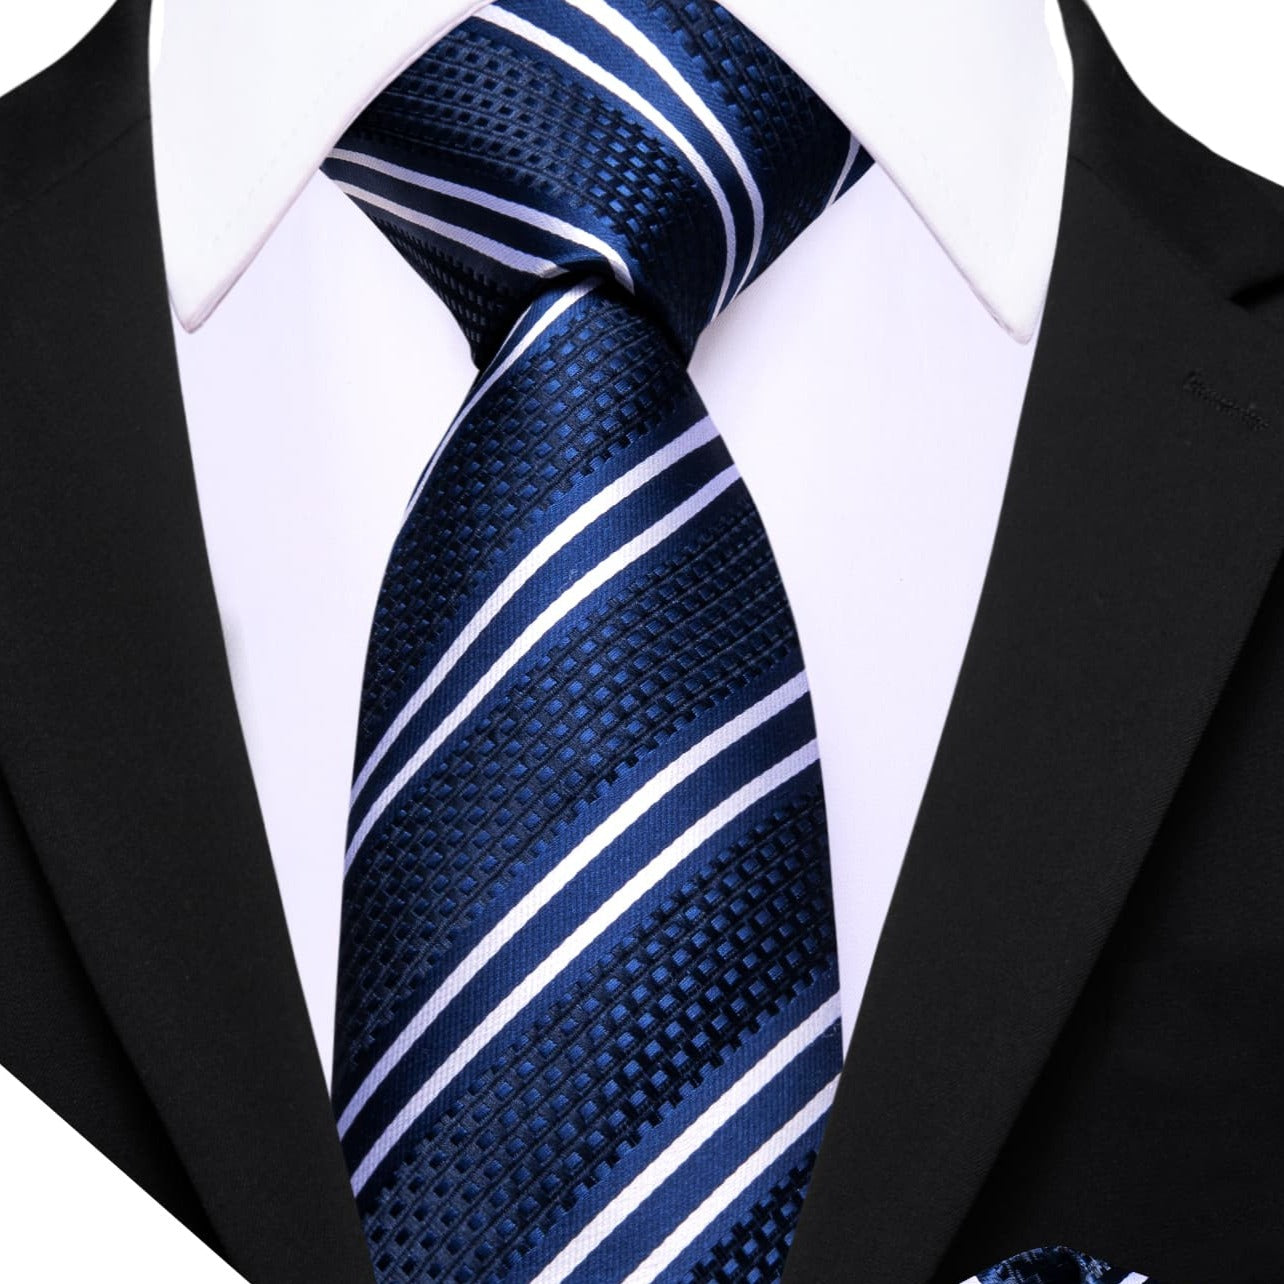  Blue Striped Tie with White Stripes Men's Business Set